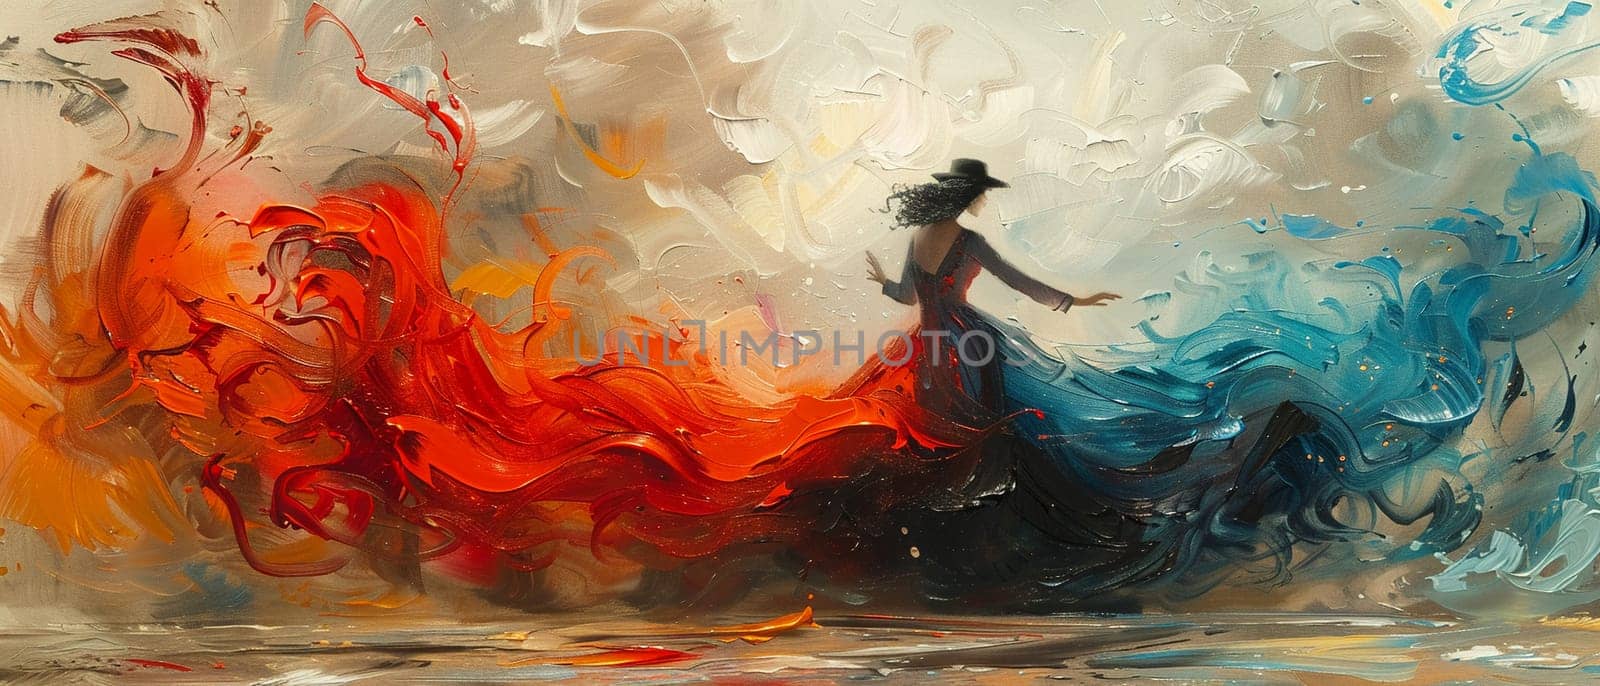 Elegant ballroom dance captured in mid-twirl, painted with flowing dresses and the grace of movement.